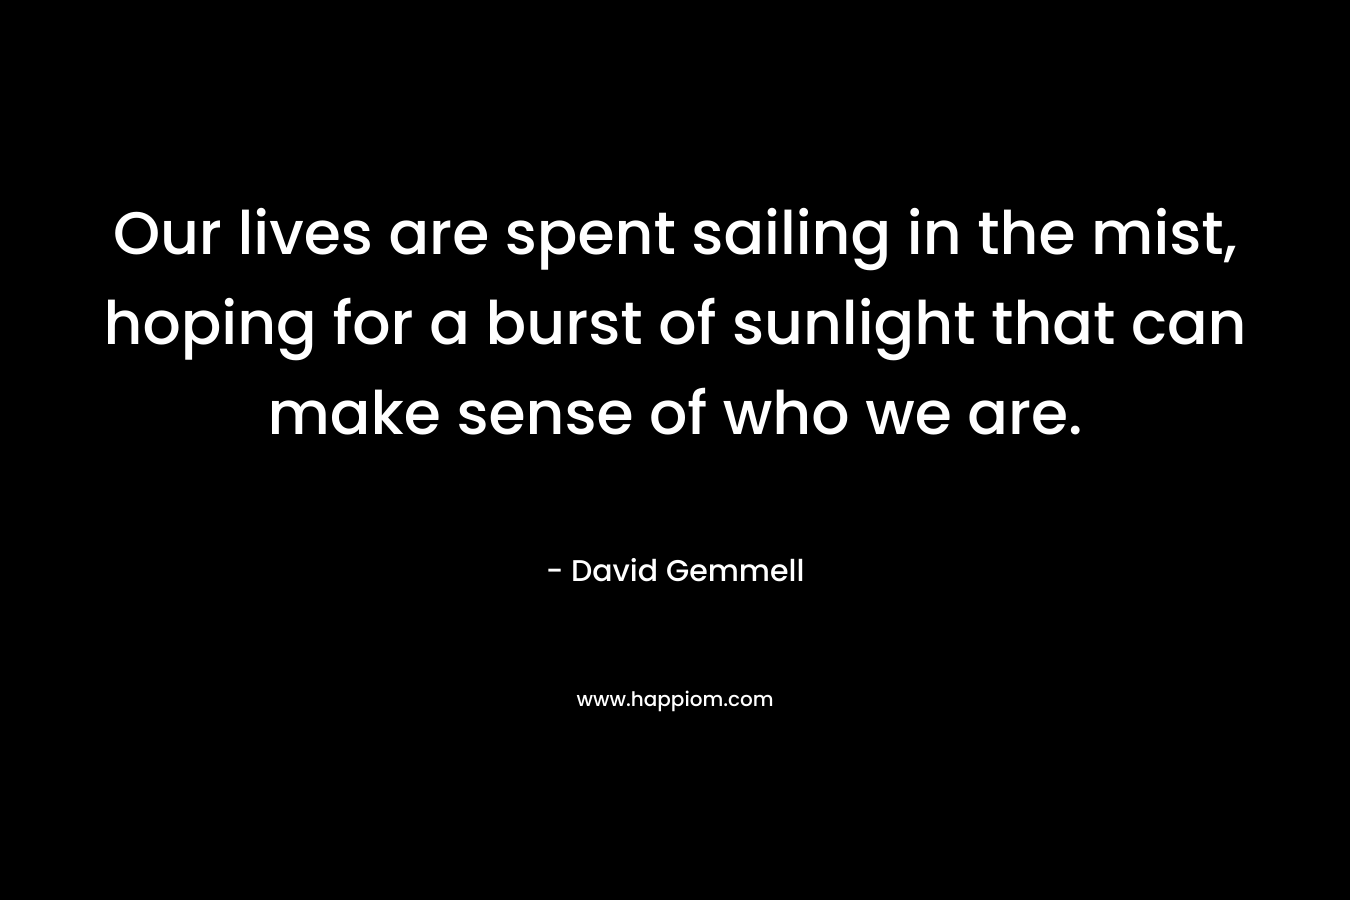 Our lives are spent sailing in the mist, hoping for a burst of sunlight that can make sense of who we are. – David Gemmell